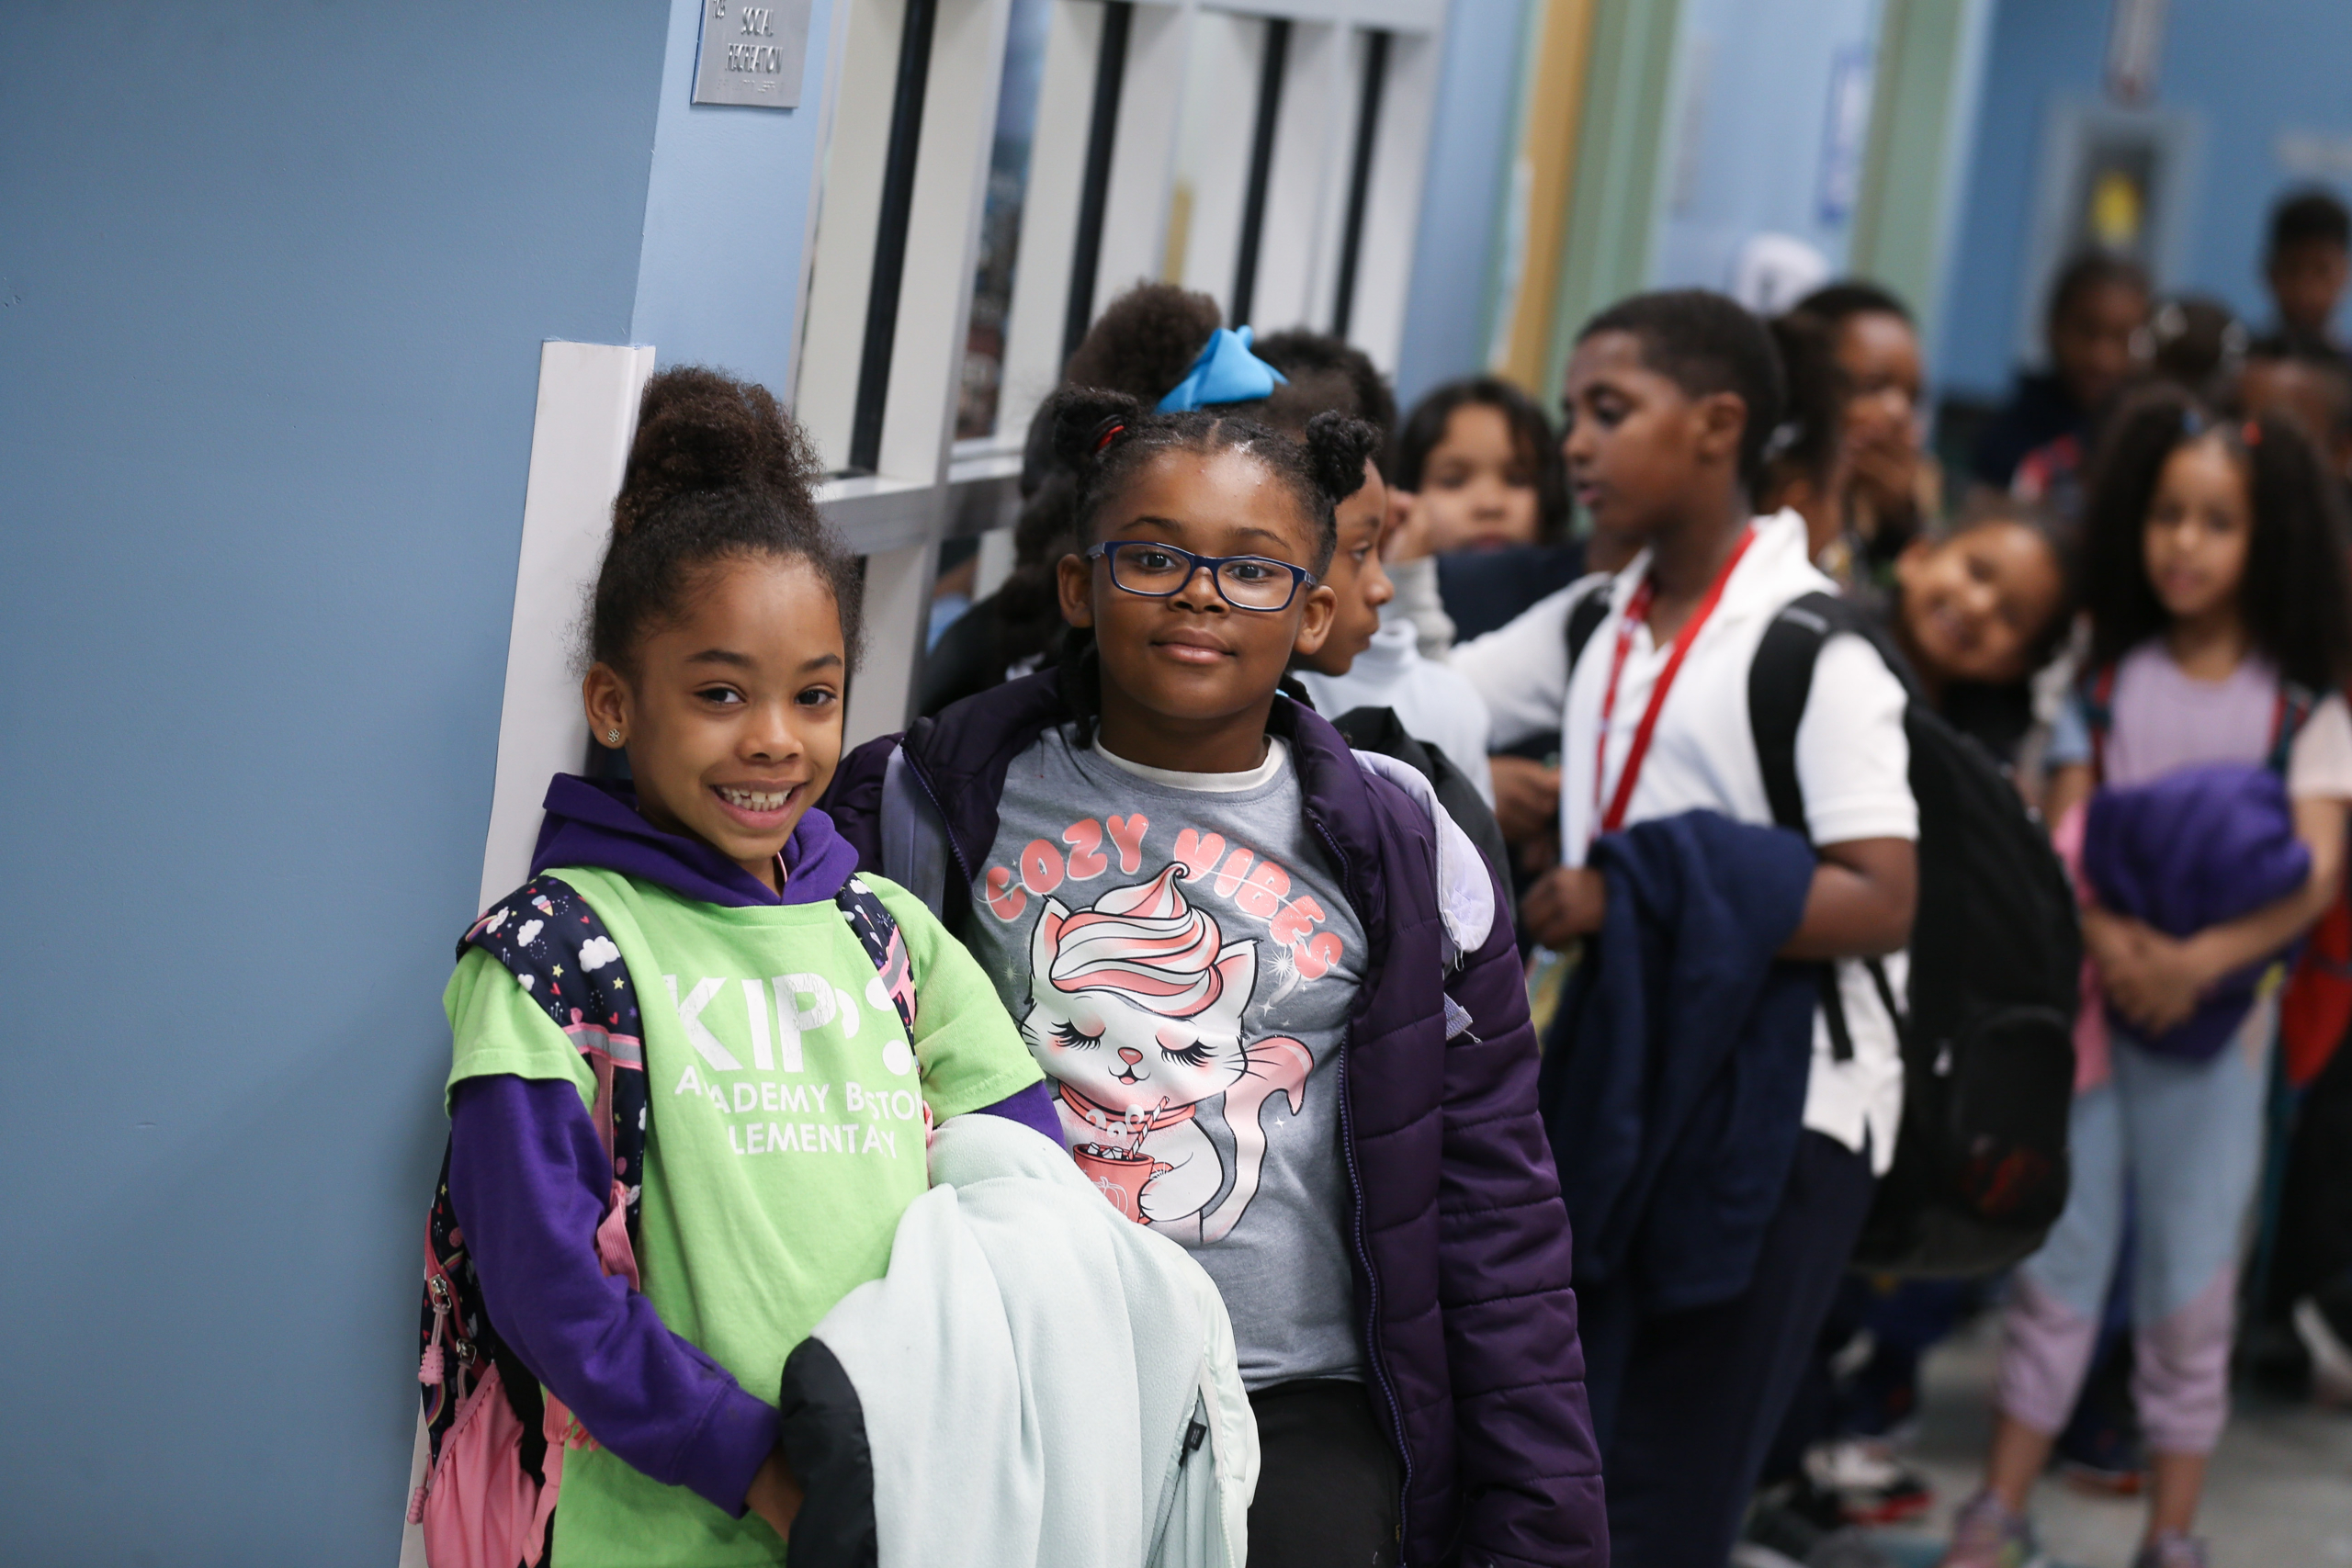 Setting young people up for academic success through BGCB’s Back-to-School Drive